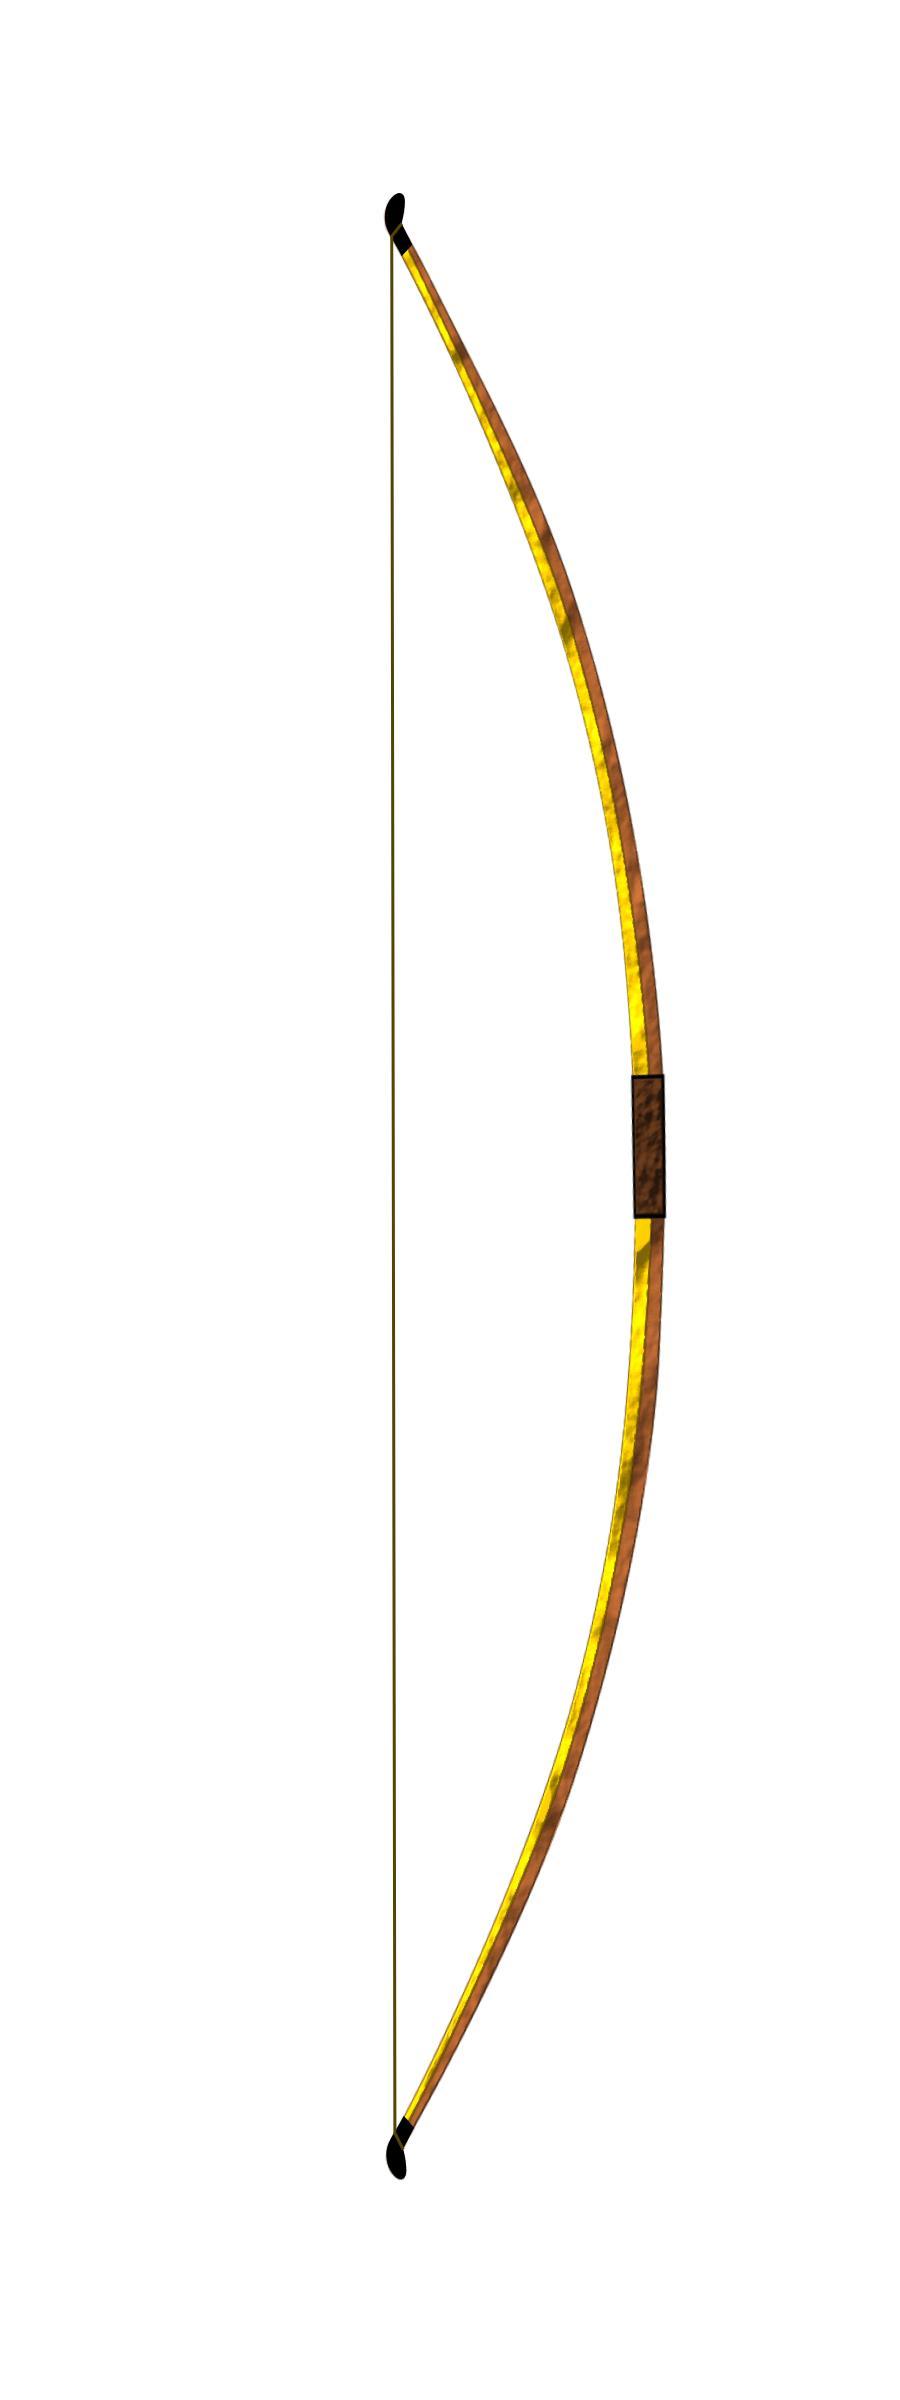 Yew Long Bow png transparent